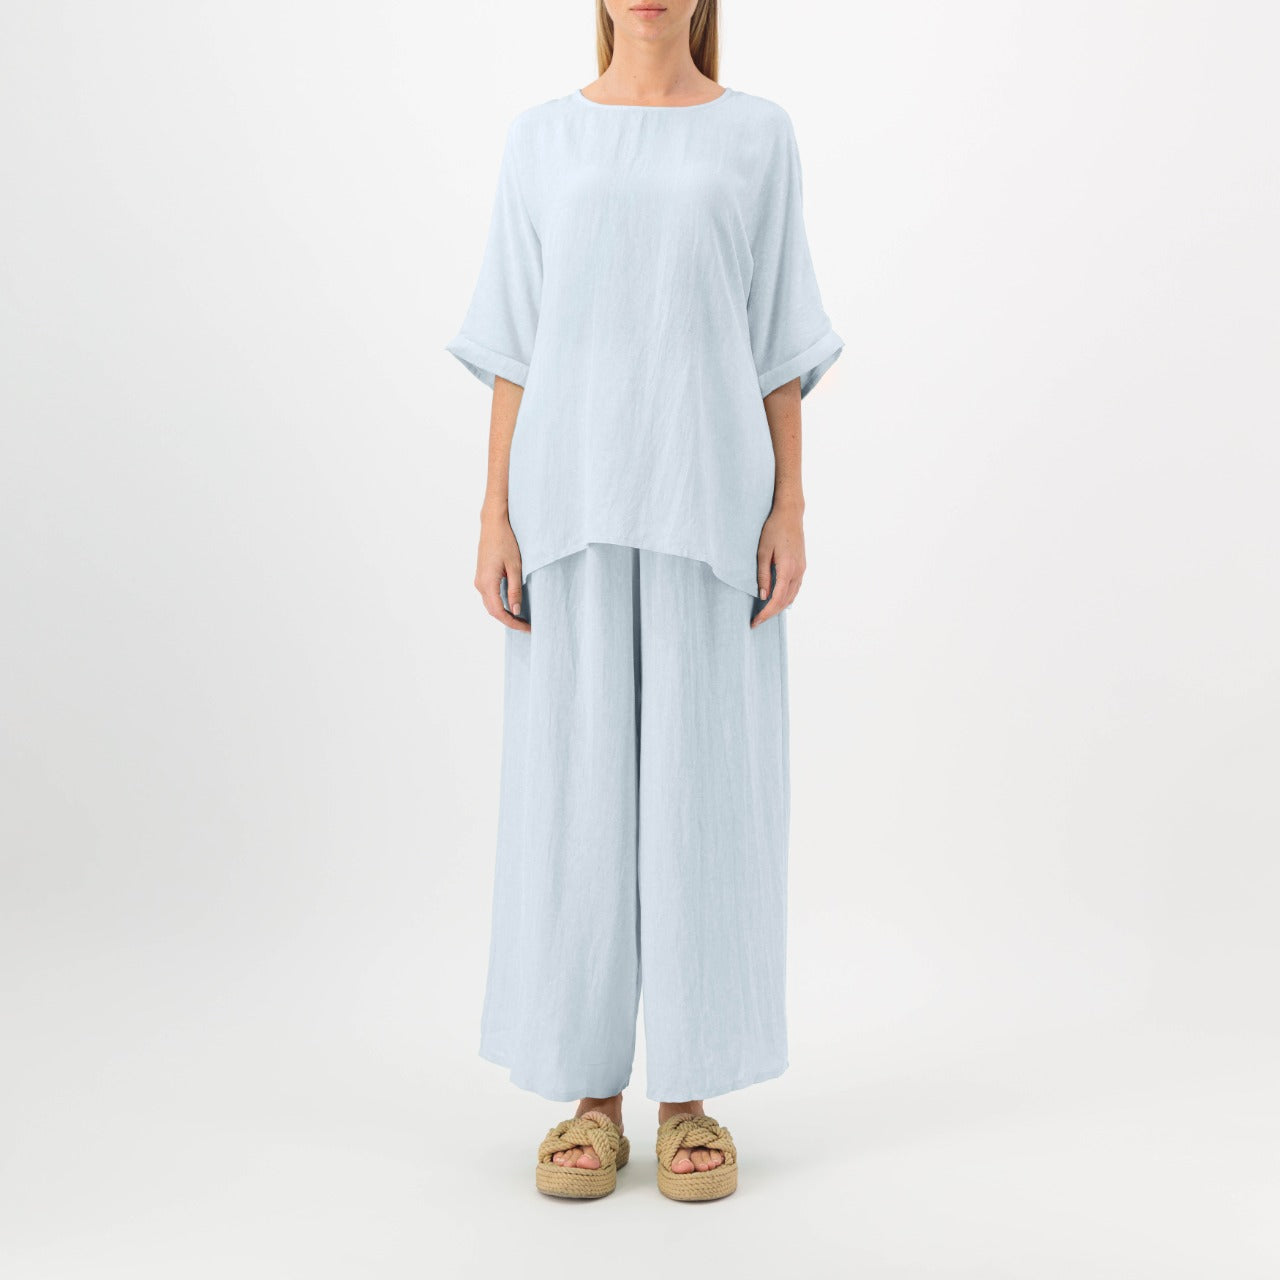 All Day Casual Set of 2- Sky Blue Outfit - Comfortable style in attractive colors - arabian outfit - casual setcasual set - all day outfits - closet fashion store